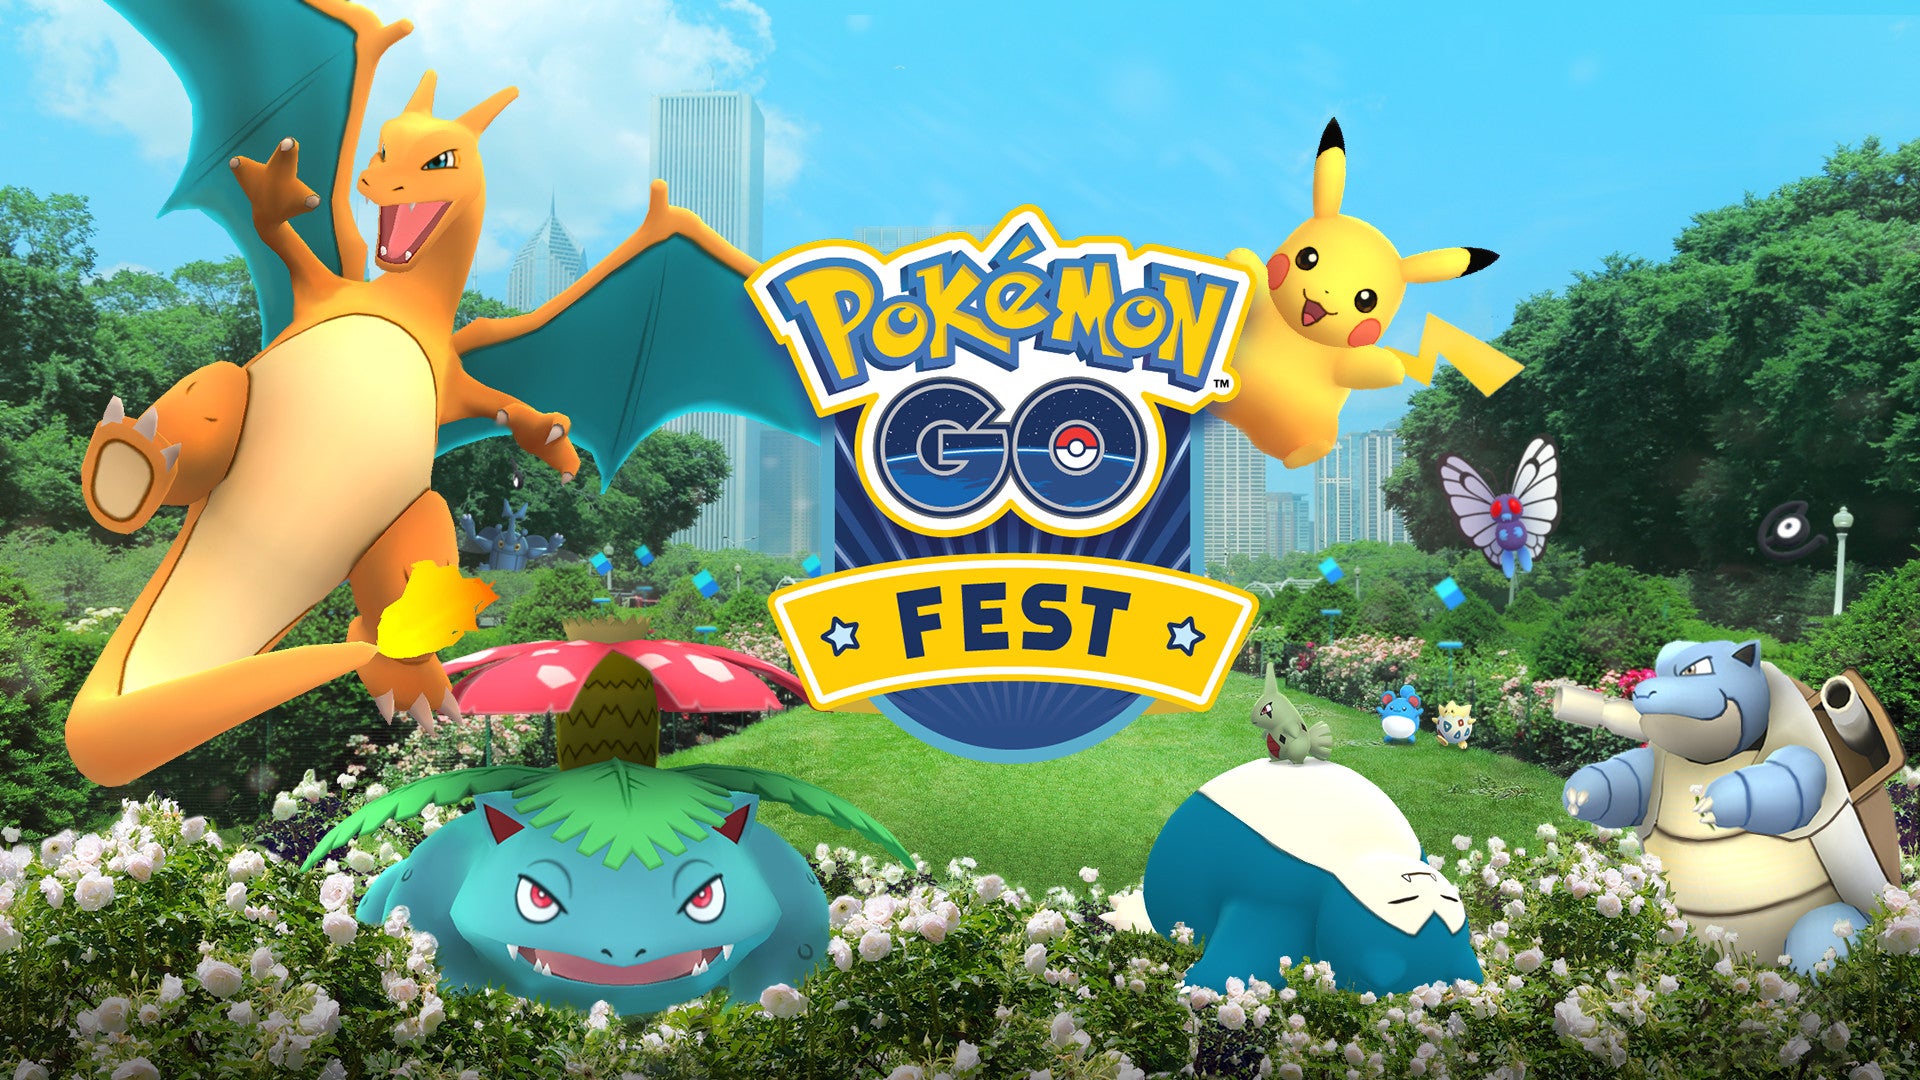 Pokemon GO celebrates its first anniversary, details Solstice in-game event, future plans